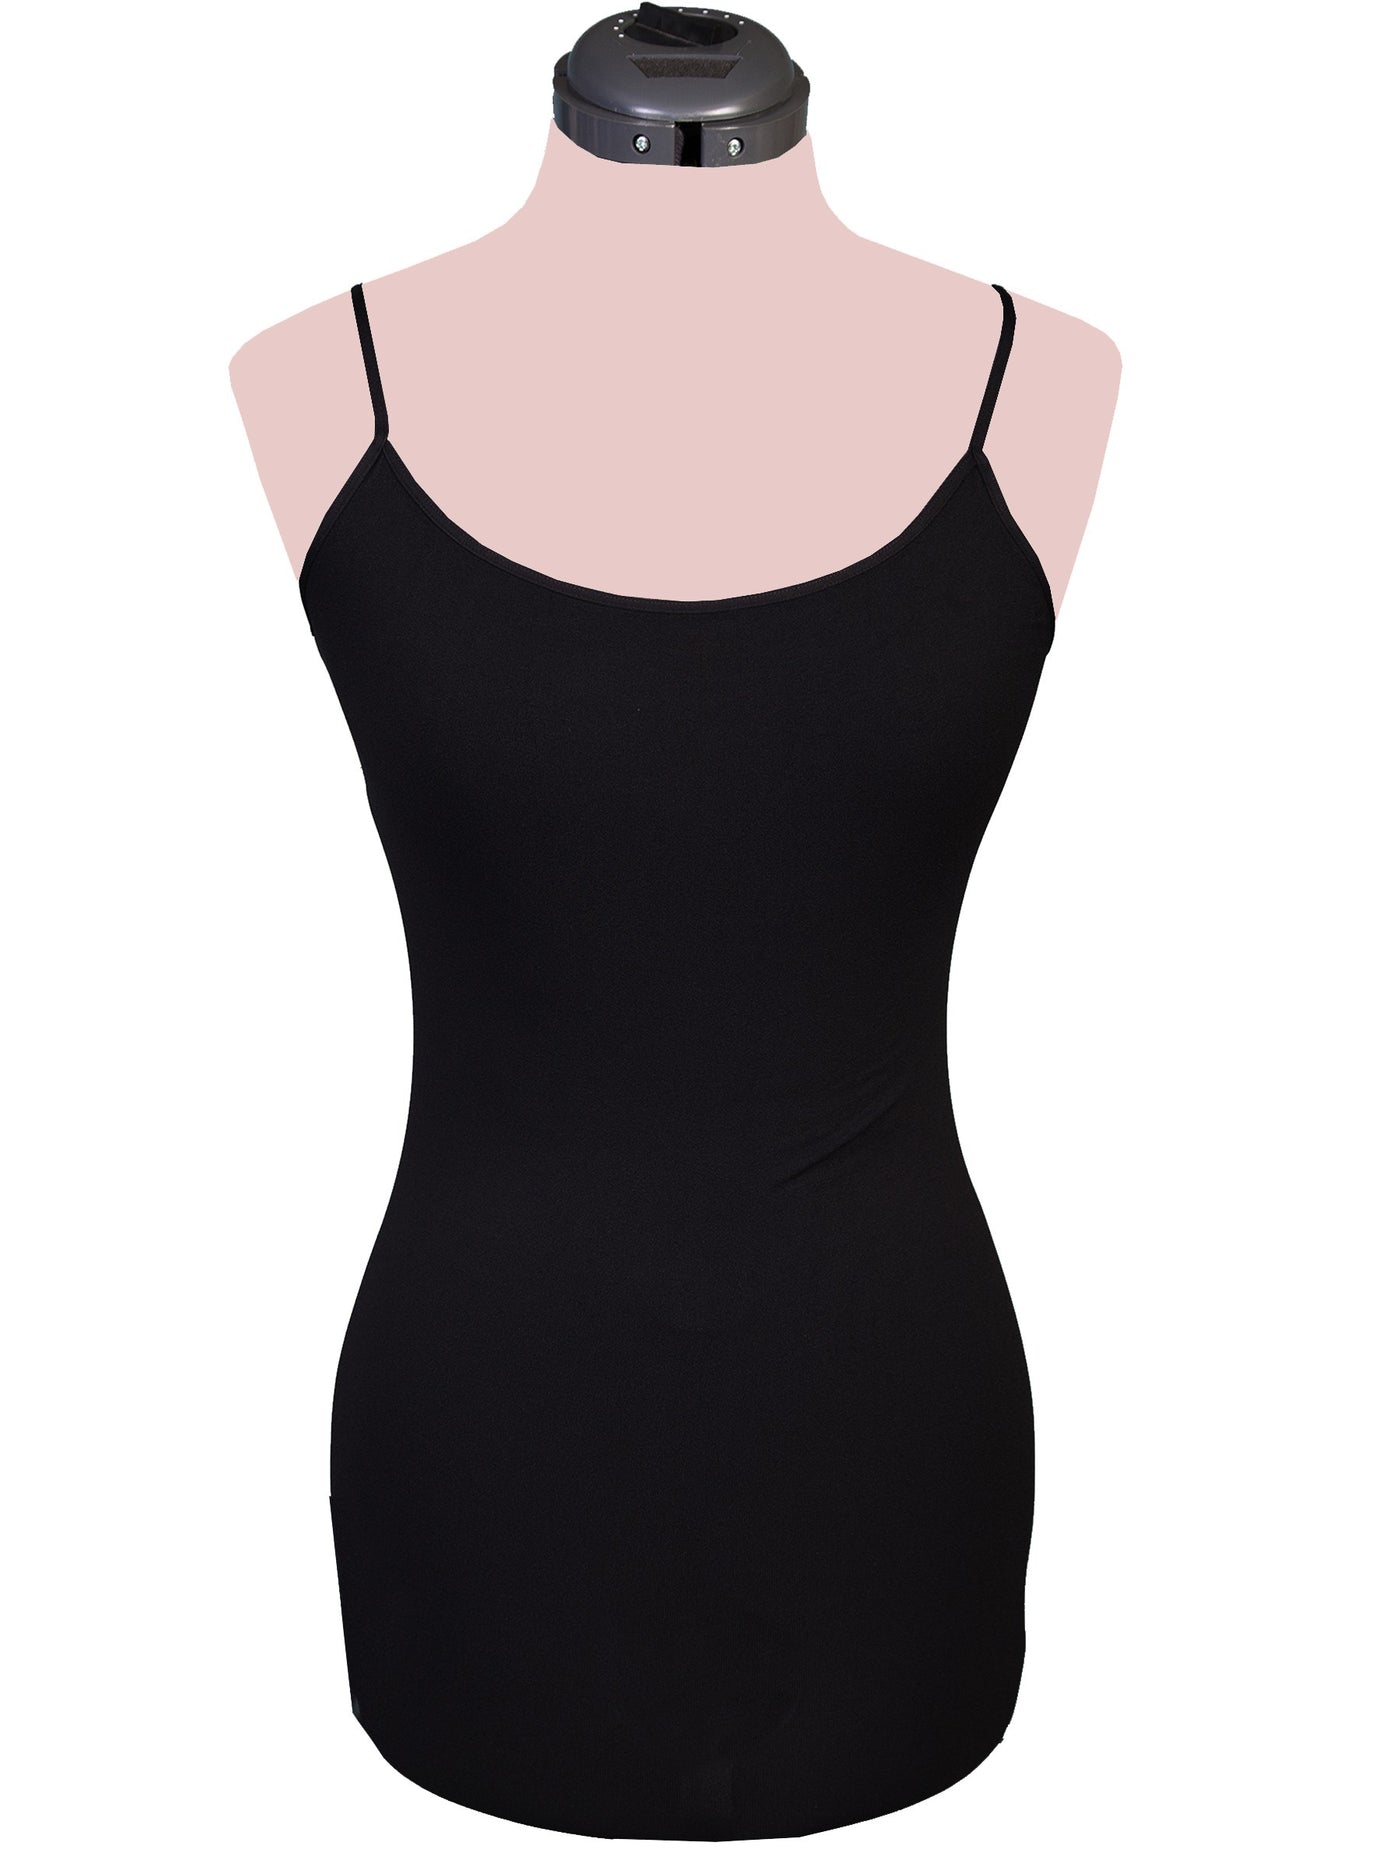 Spring Star Seamless Camisole in Black - SOLD OUT